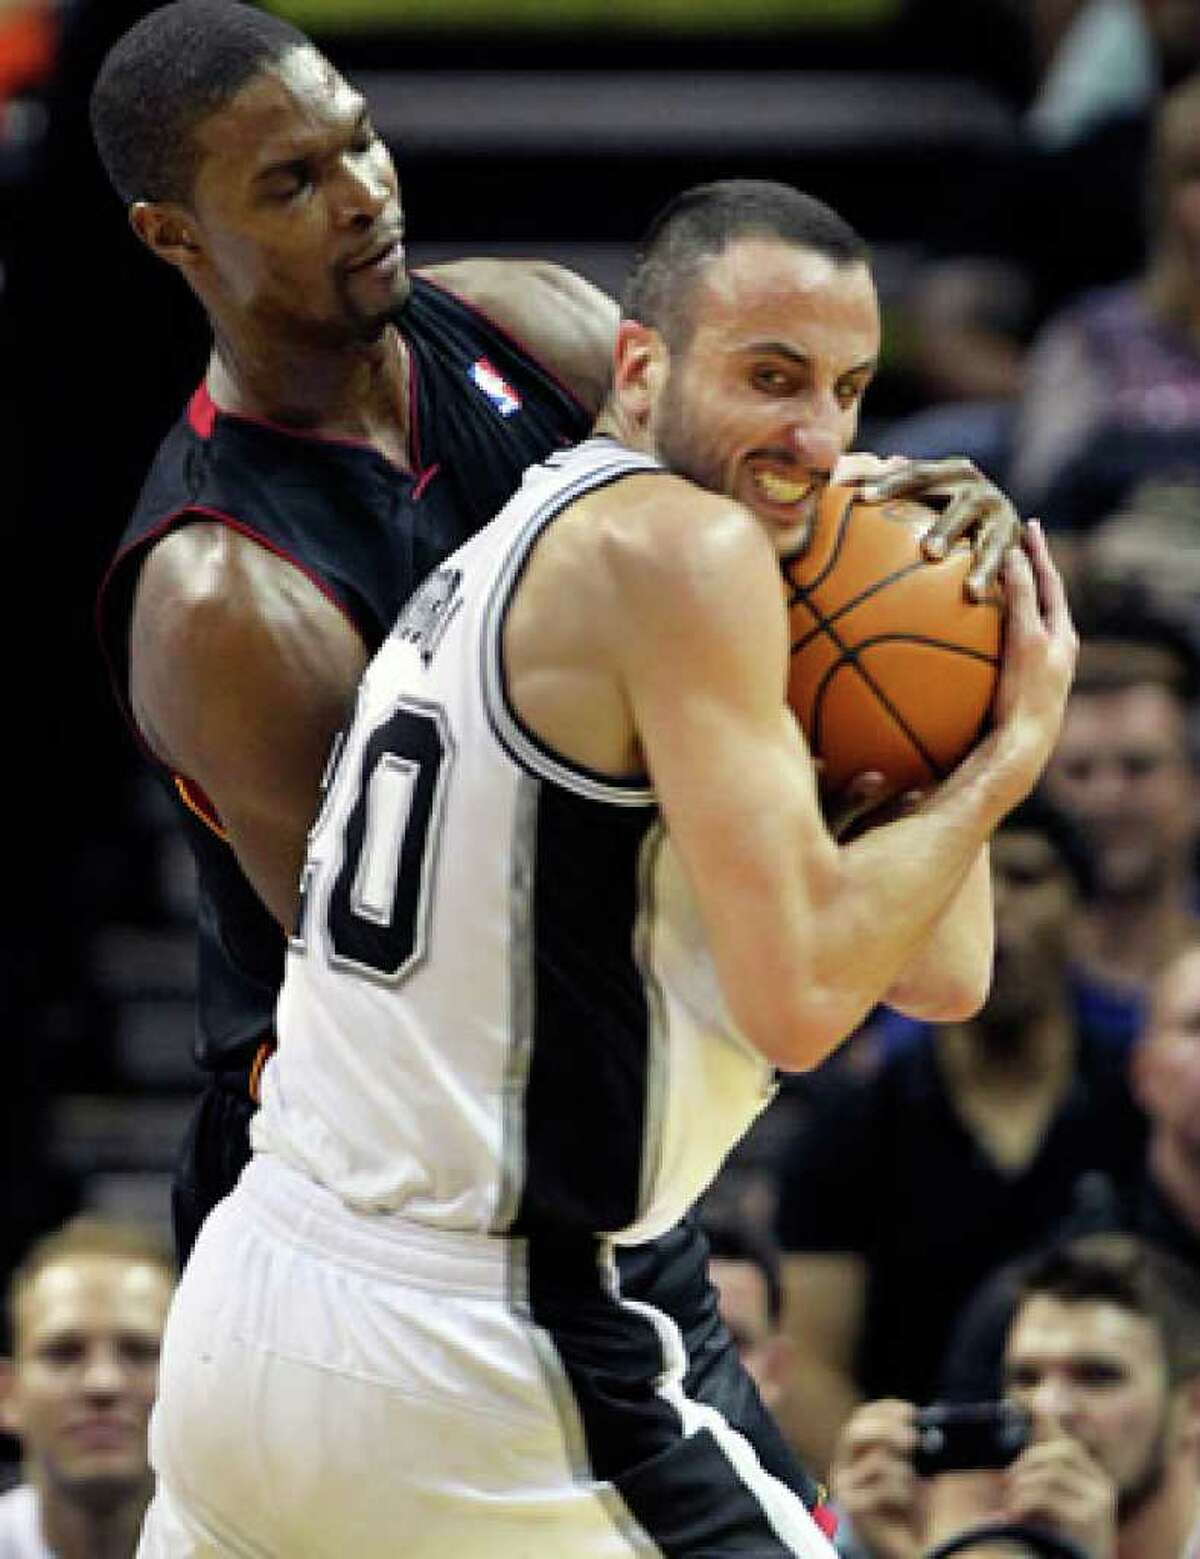 Spurs guard Manu Ginobili rips the ball away from Chris Bosh of the Miami Heat in the first half Saturday night.